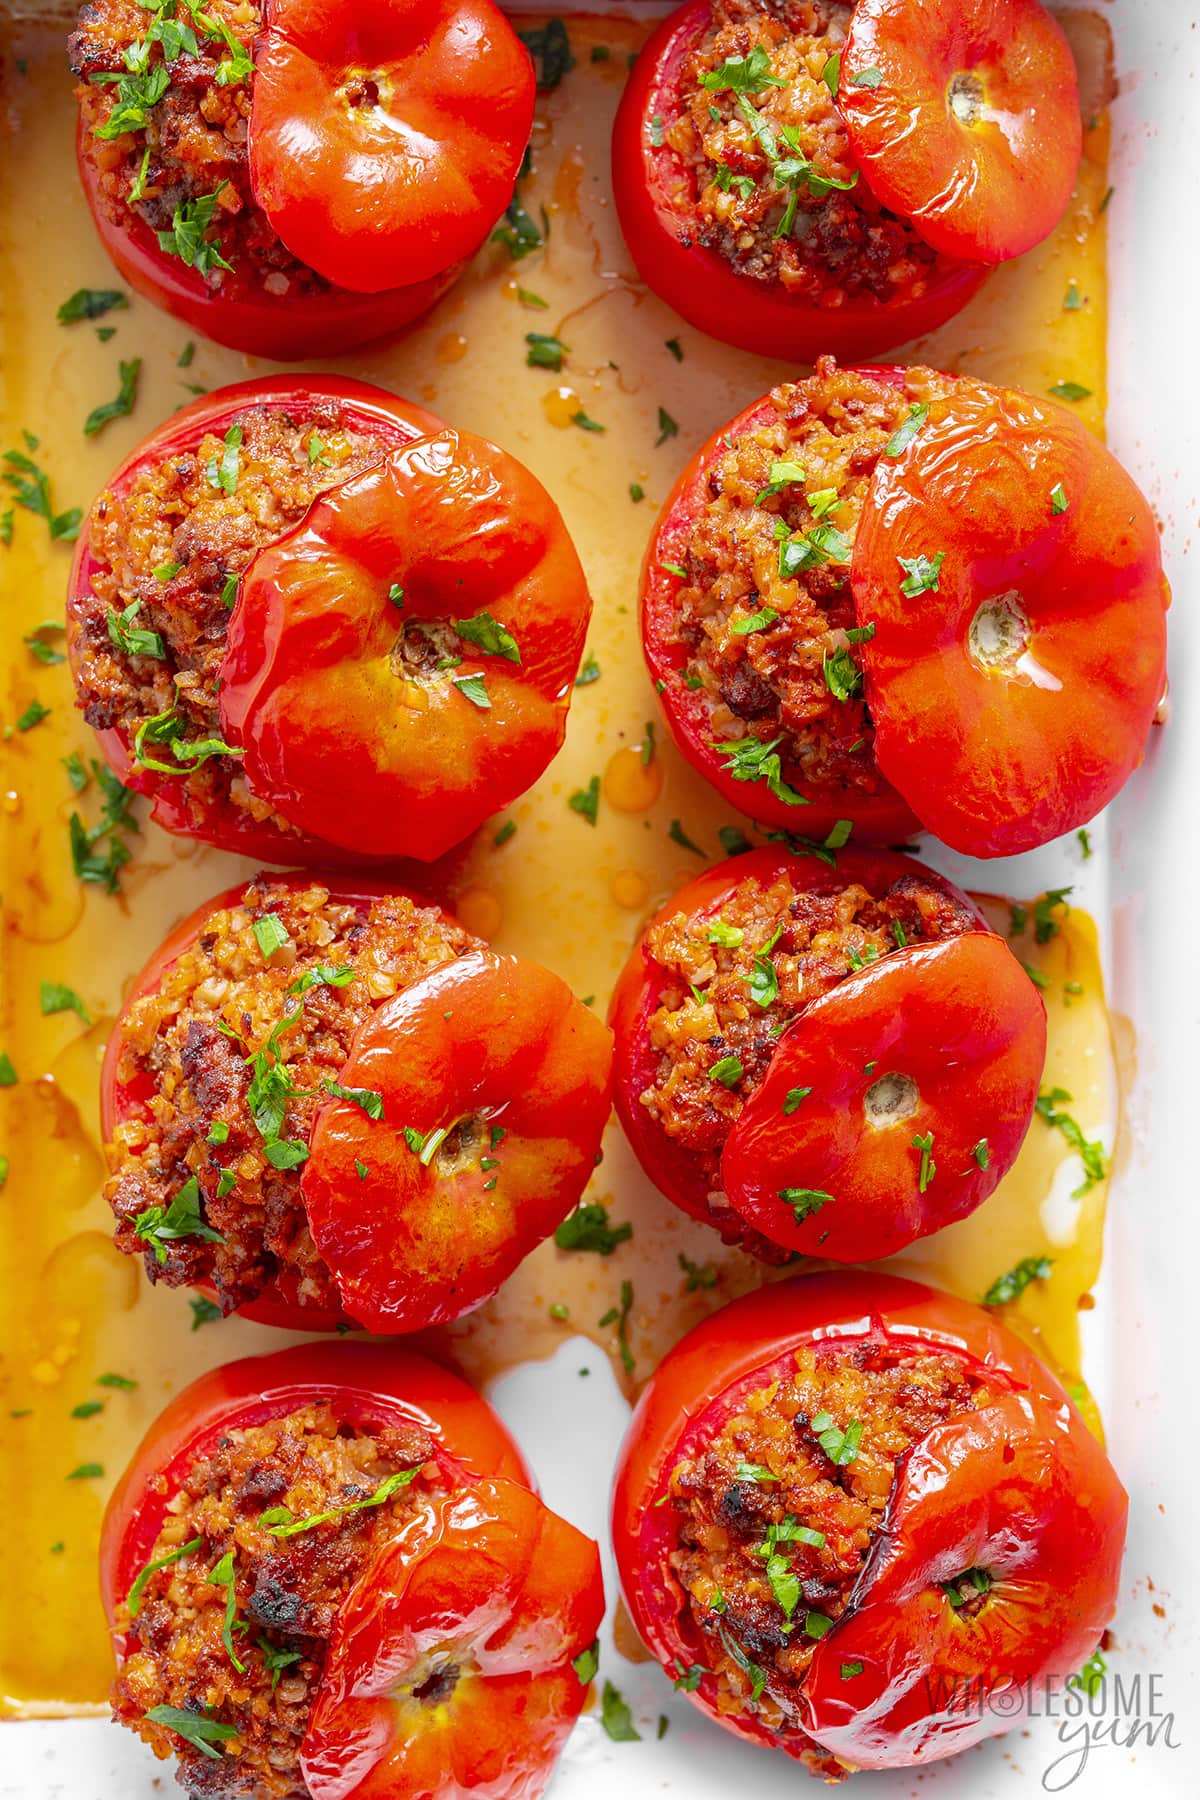 Baked stuffed tomatoes in a baking dish.